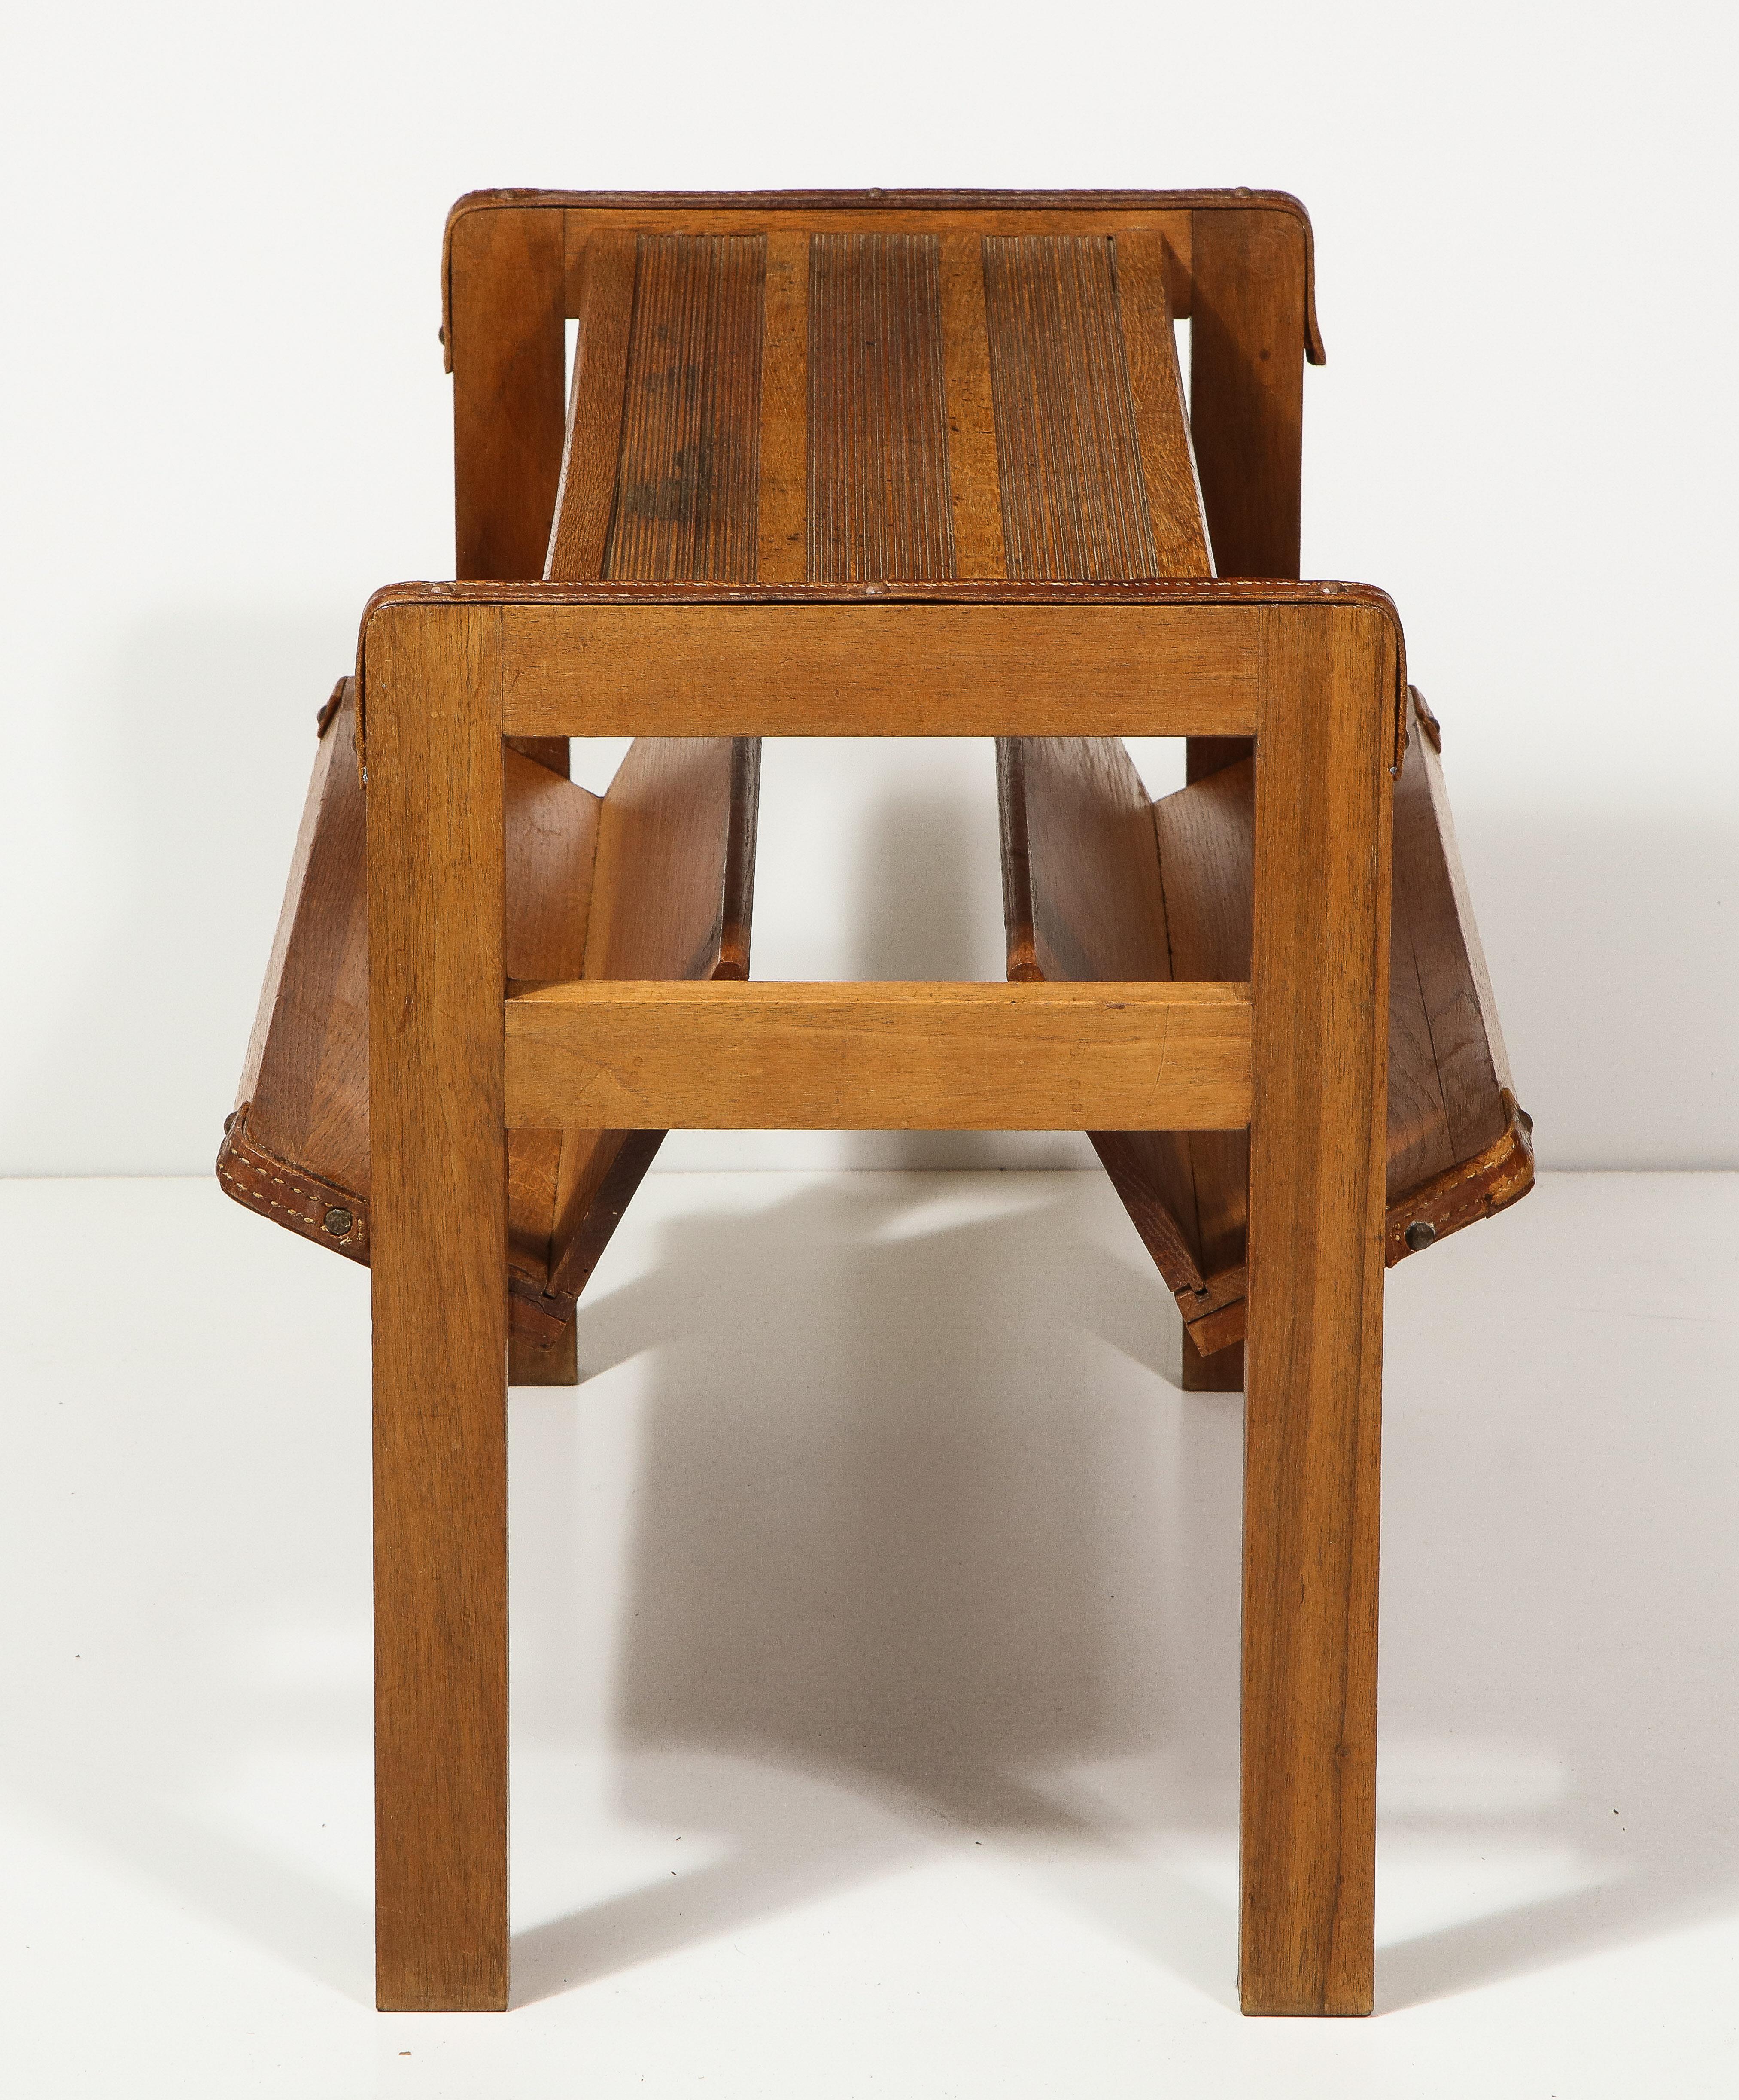 French Oak and Leather Magazine Rack by Jacques Adnet, France, C. Mid-20th Century For Sale